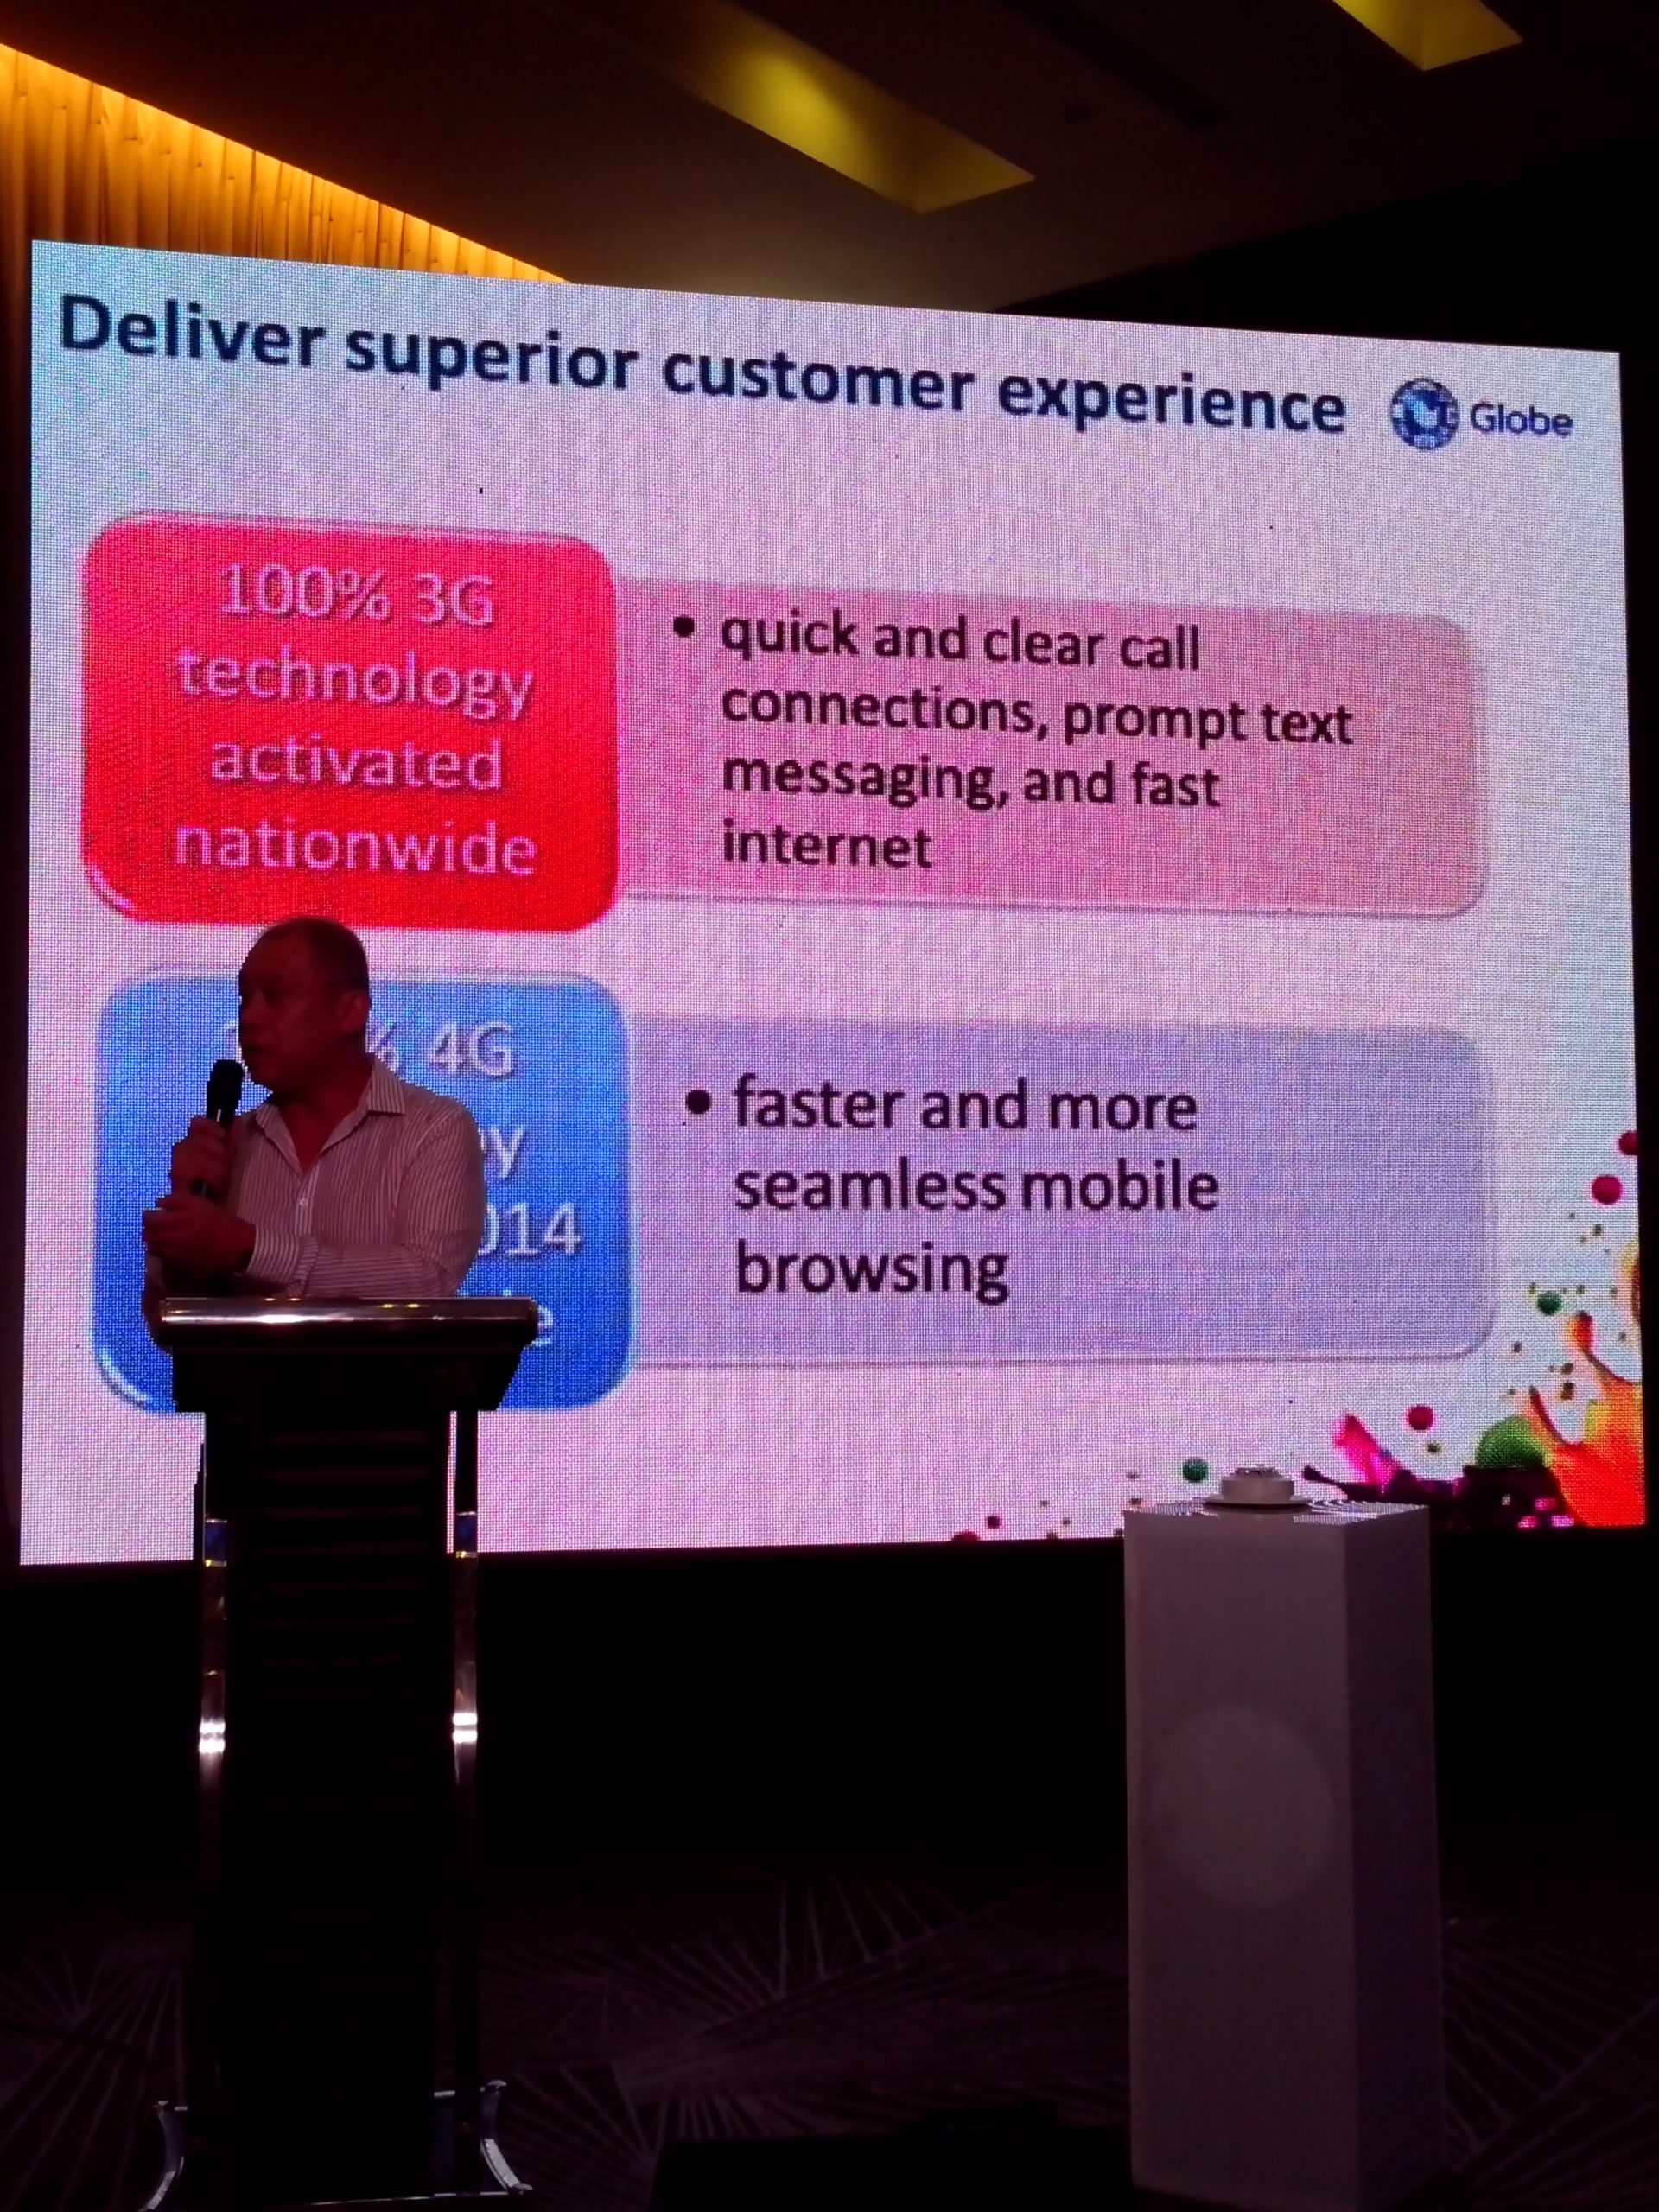 Globe Telecom: Network Now 100% 3G; Full 4G Coverage In 90 Days